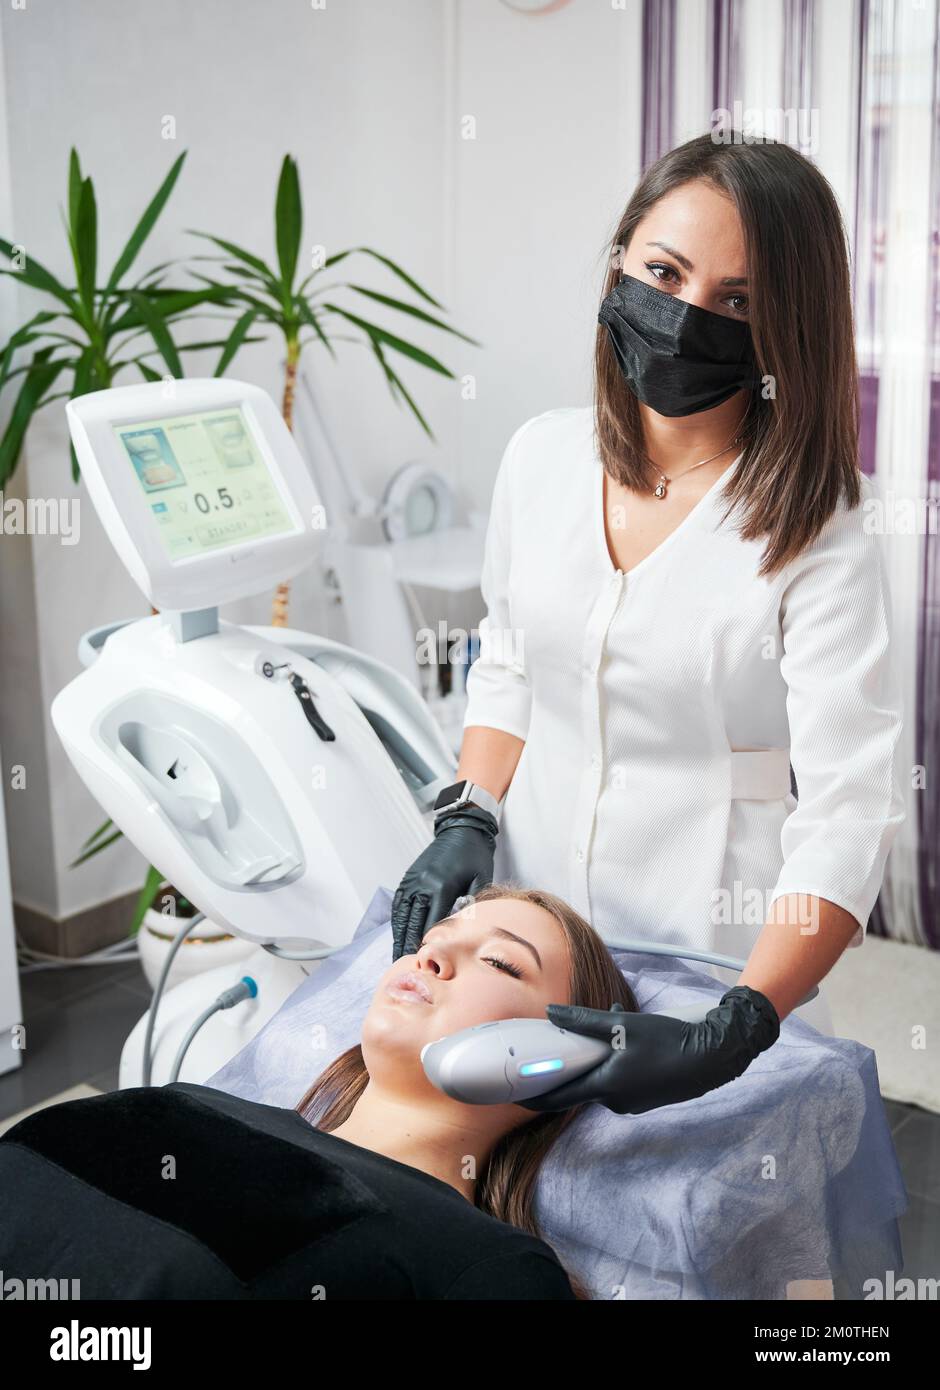 Kyiv, Ukraine - December 26, 2020: Specialist in the field of aesthetic medicine performing ultrasonic non-surgical facelift procedure for woman. SMAS lifting - great alternative to plastic surgery. Stock Photo